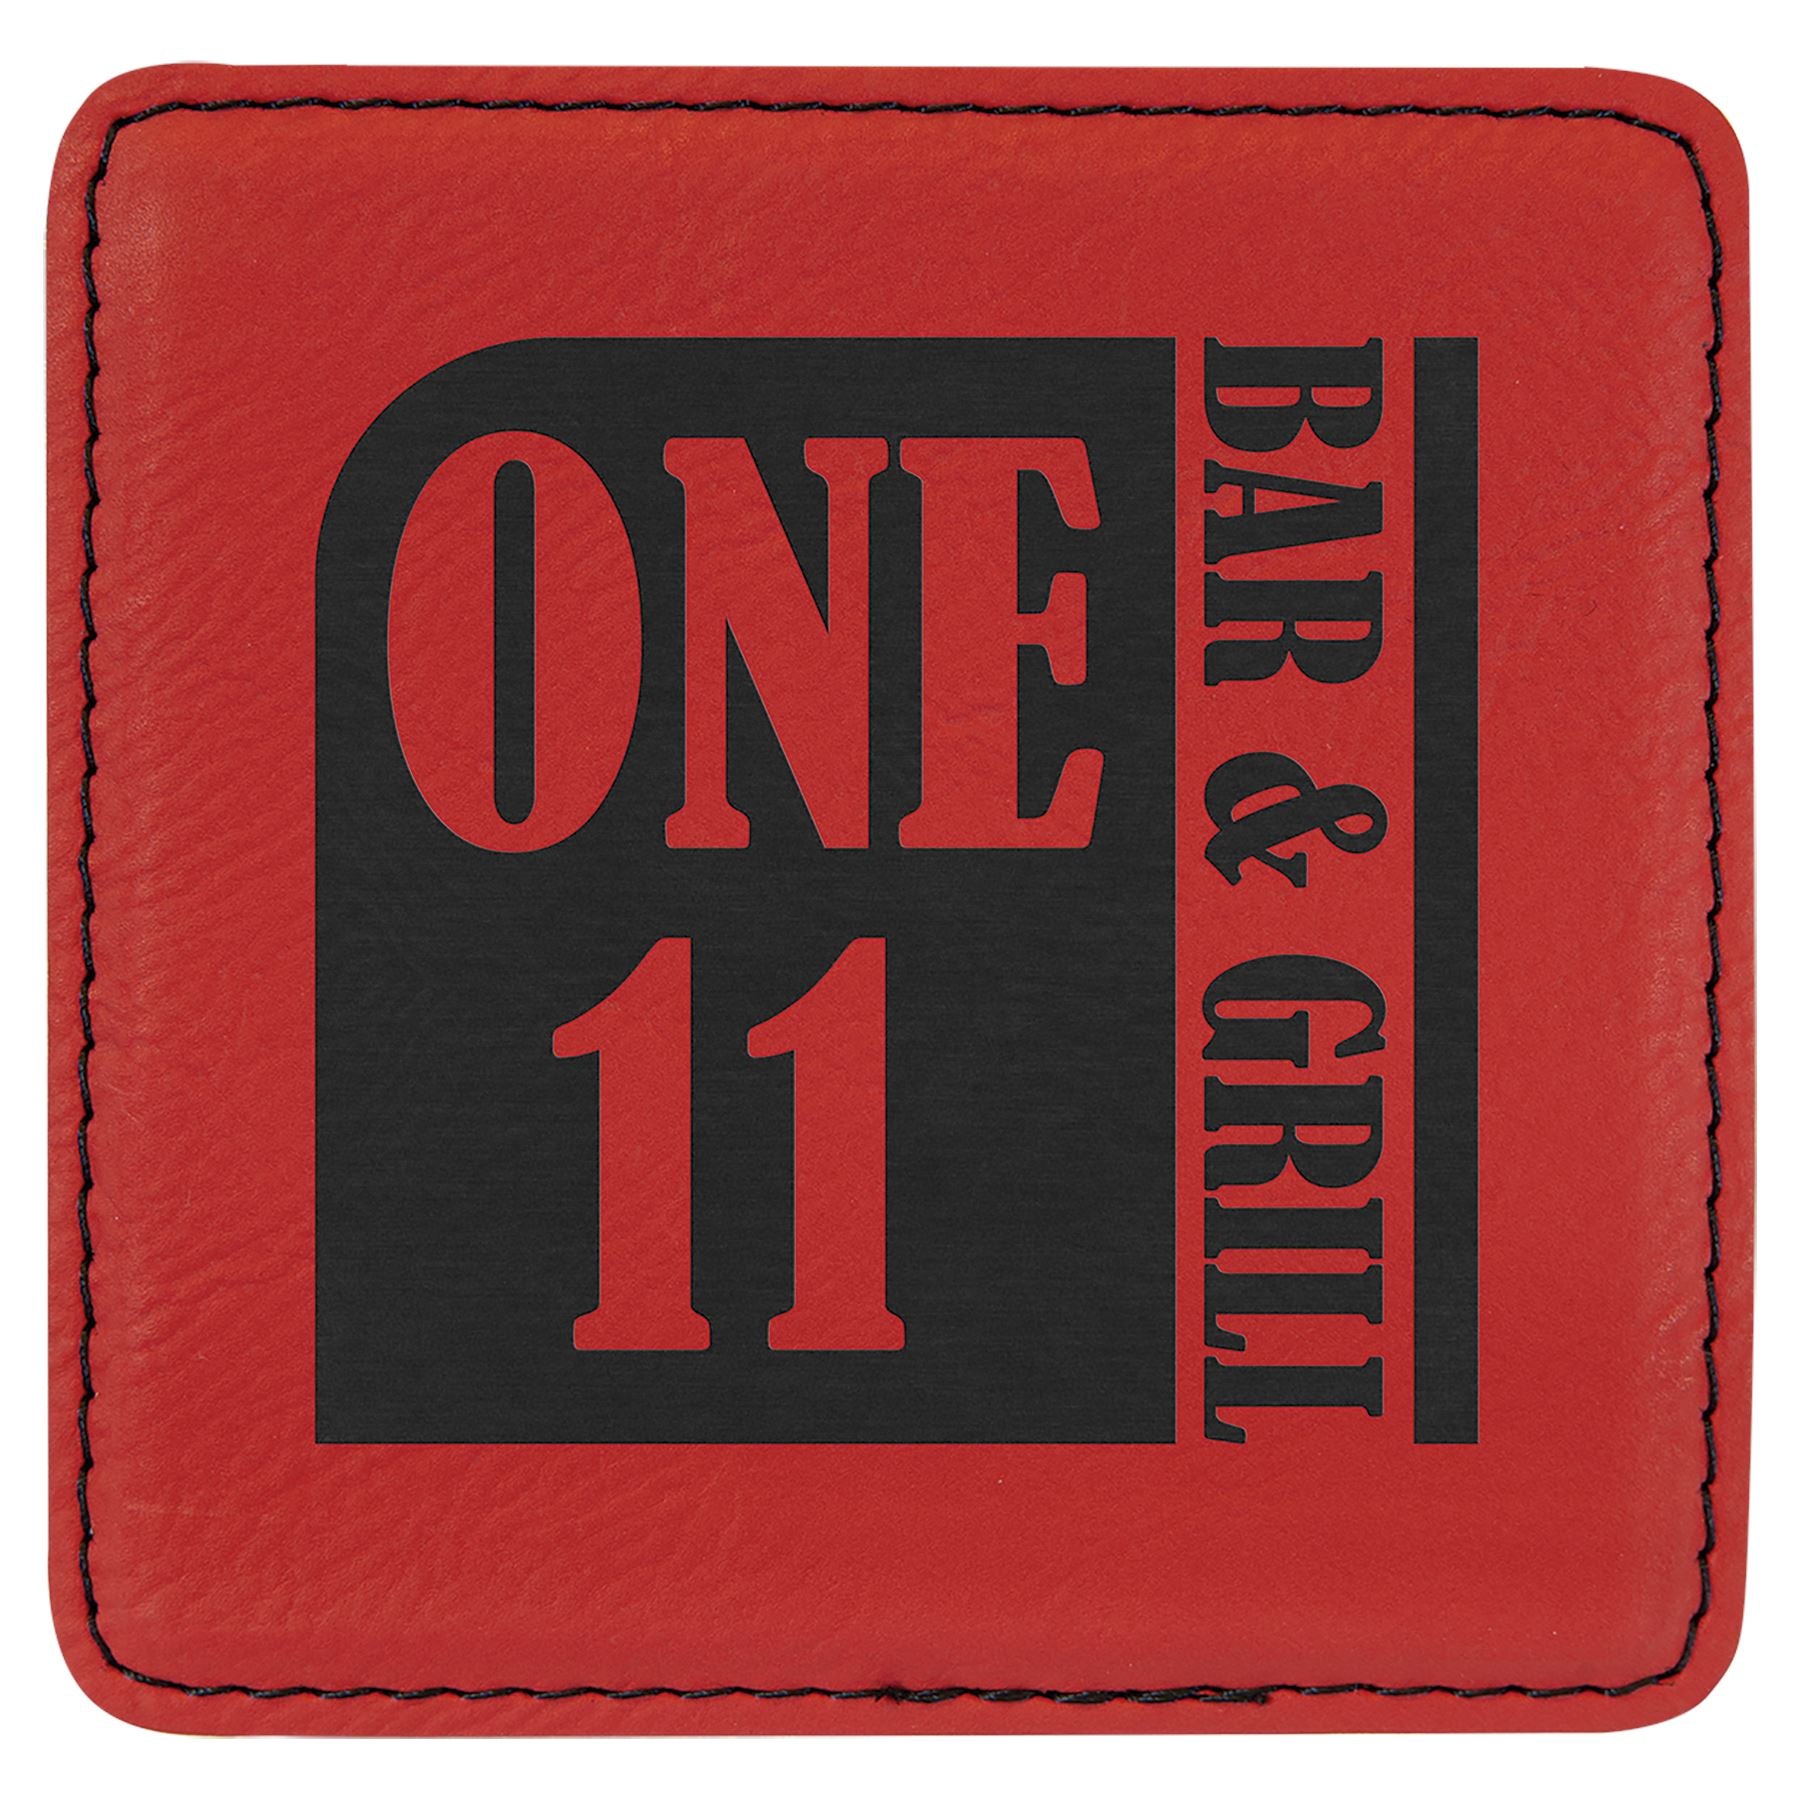 Square Drink Coaster, 4" x 4" Laserable Leatherette - Craftworks NW, LLC